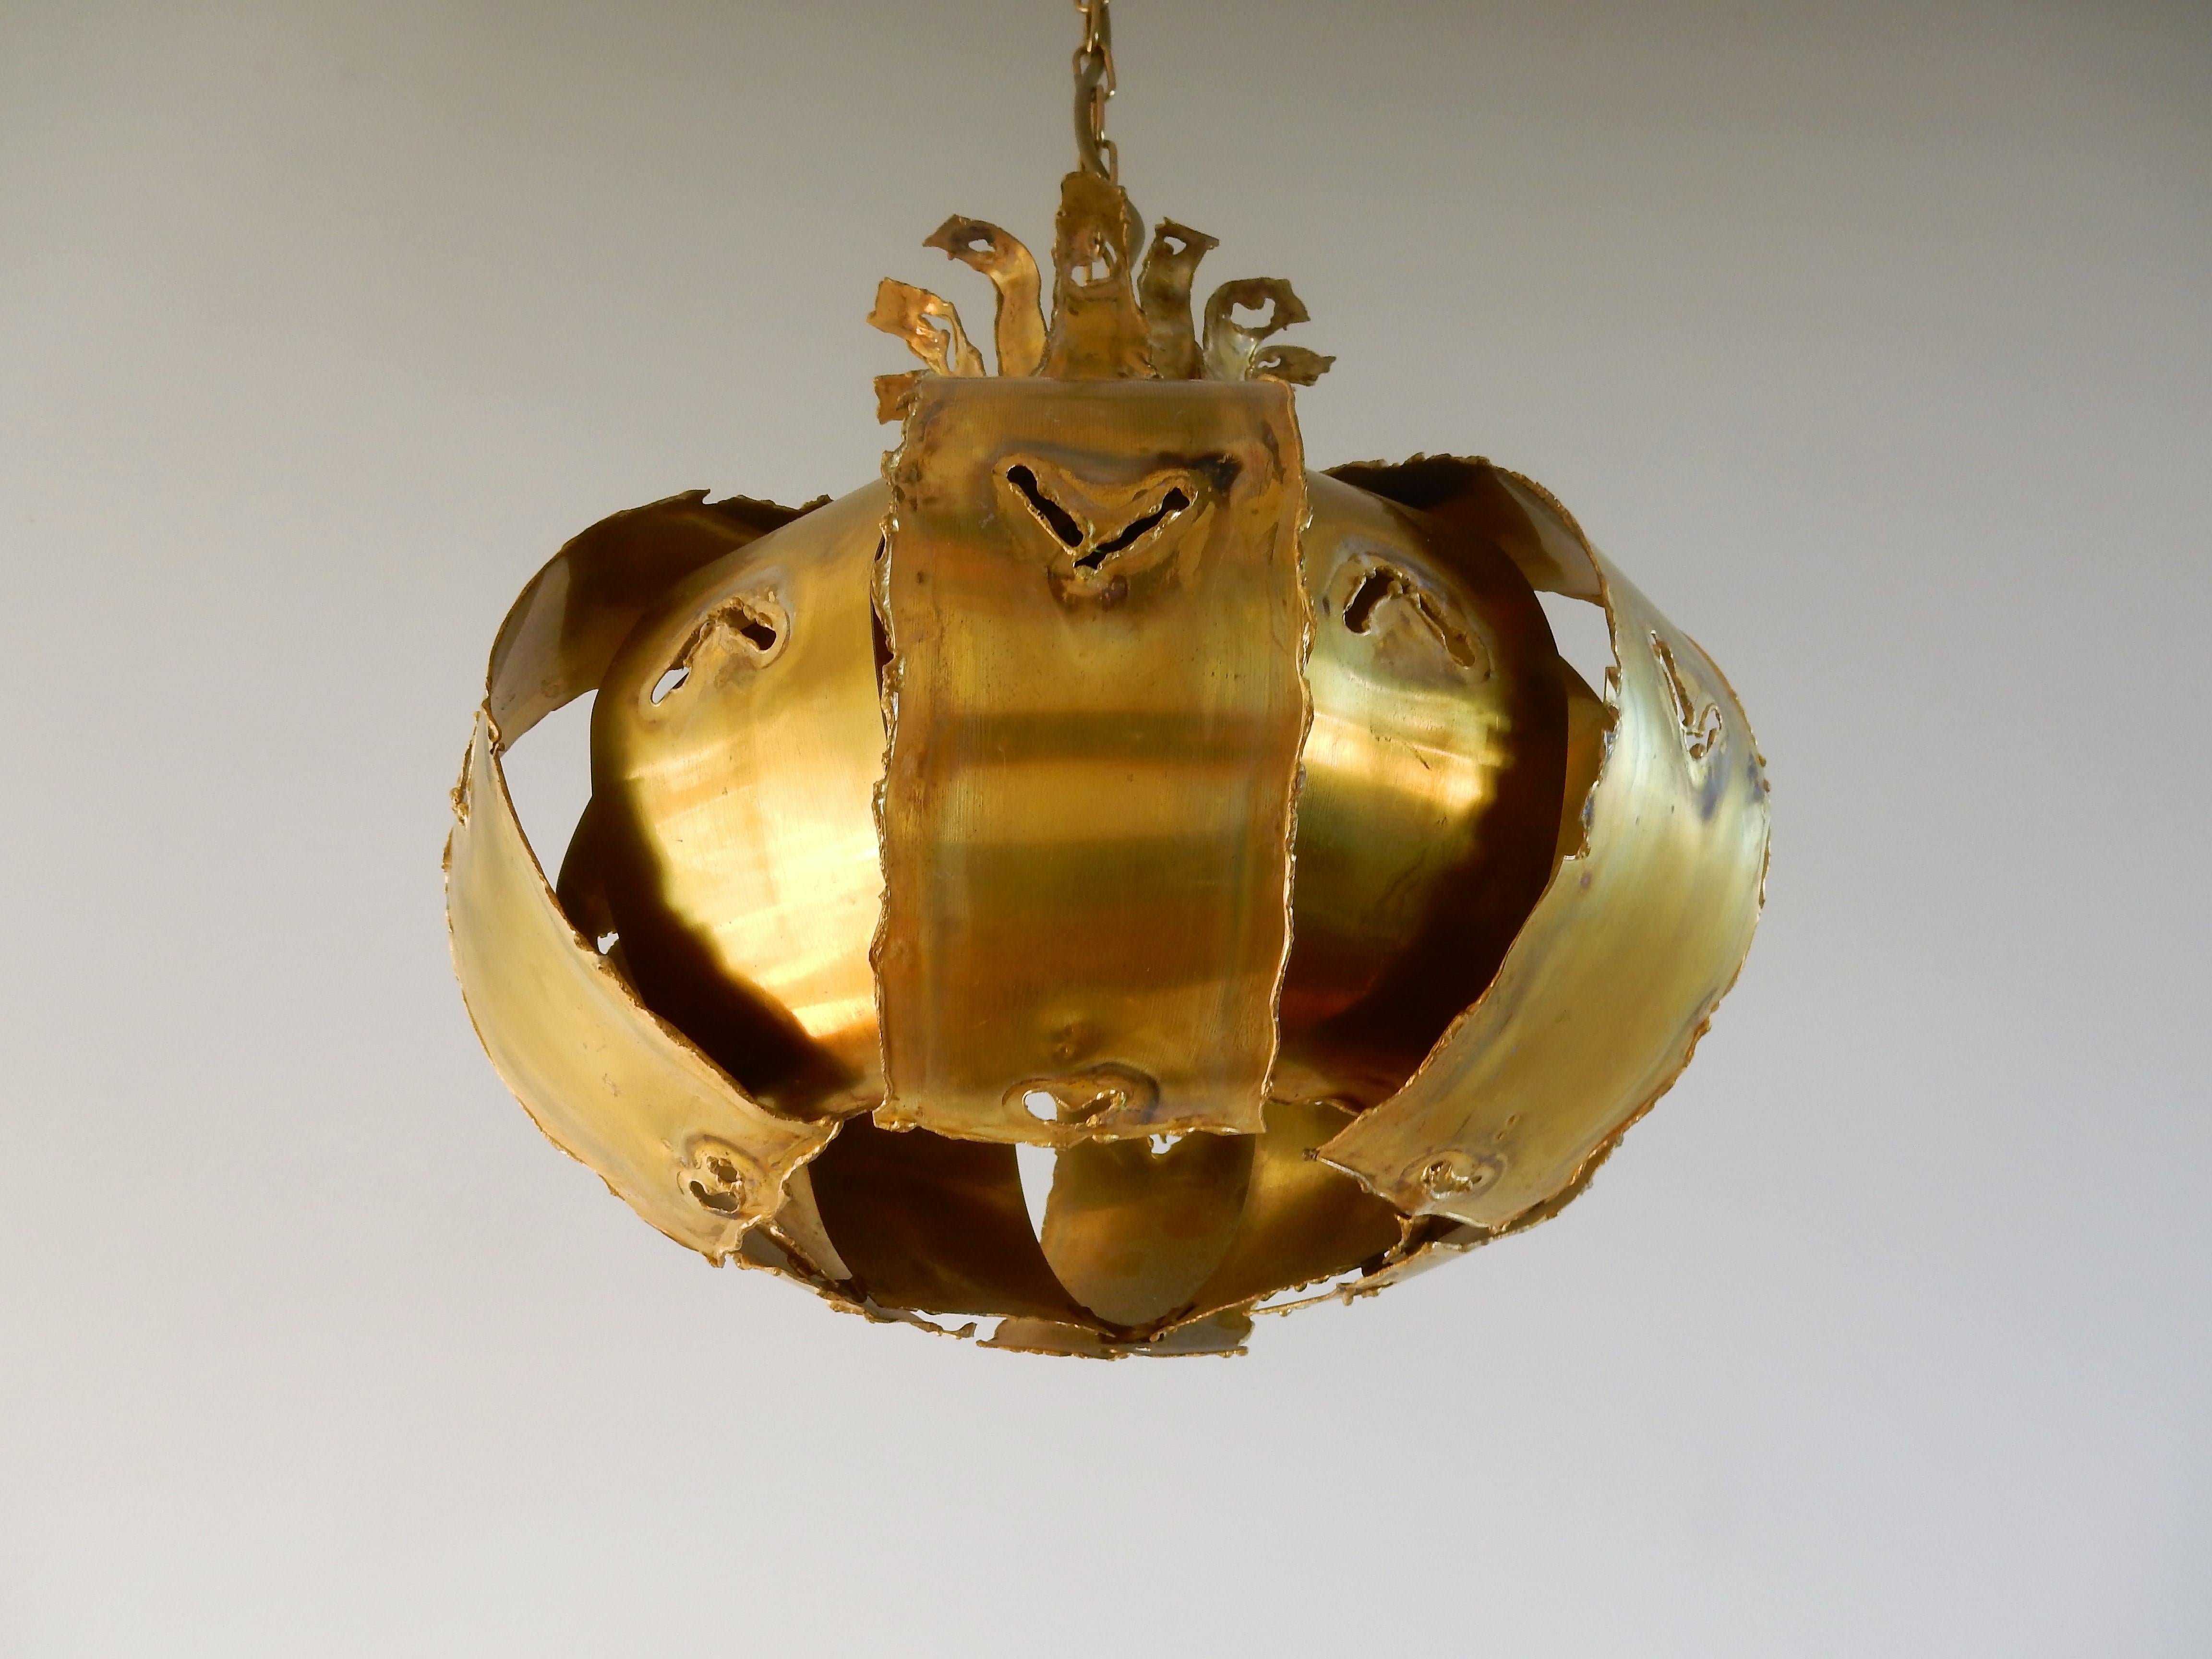 Danish Brutalist Pendant Lamp by Thea Metal from Denmark, 1960s For Sale